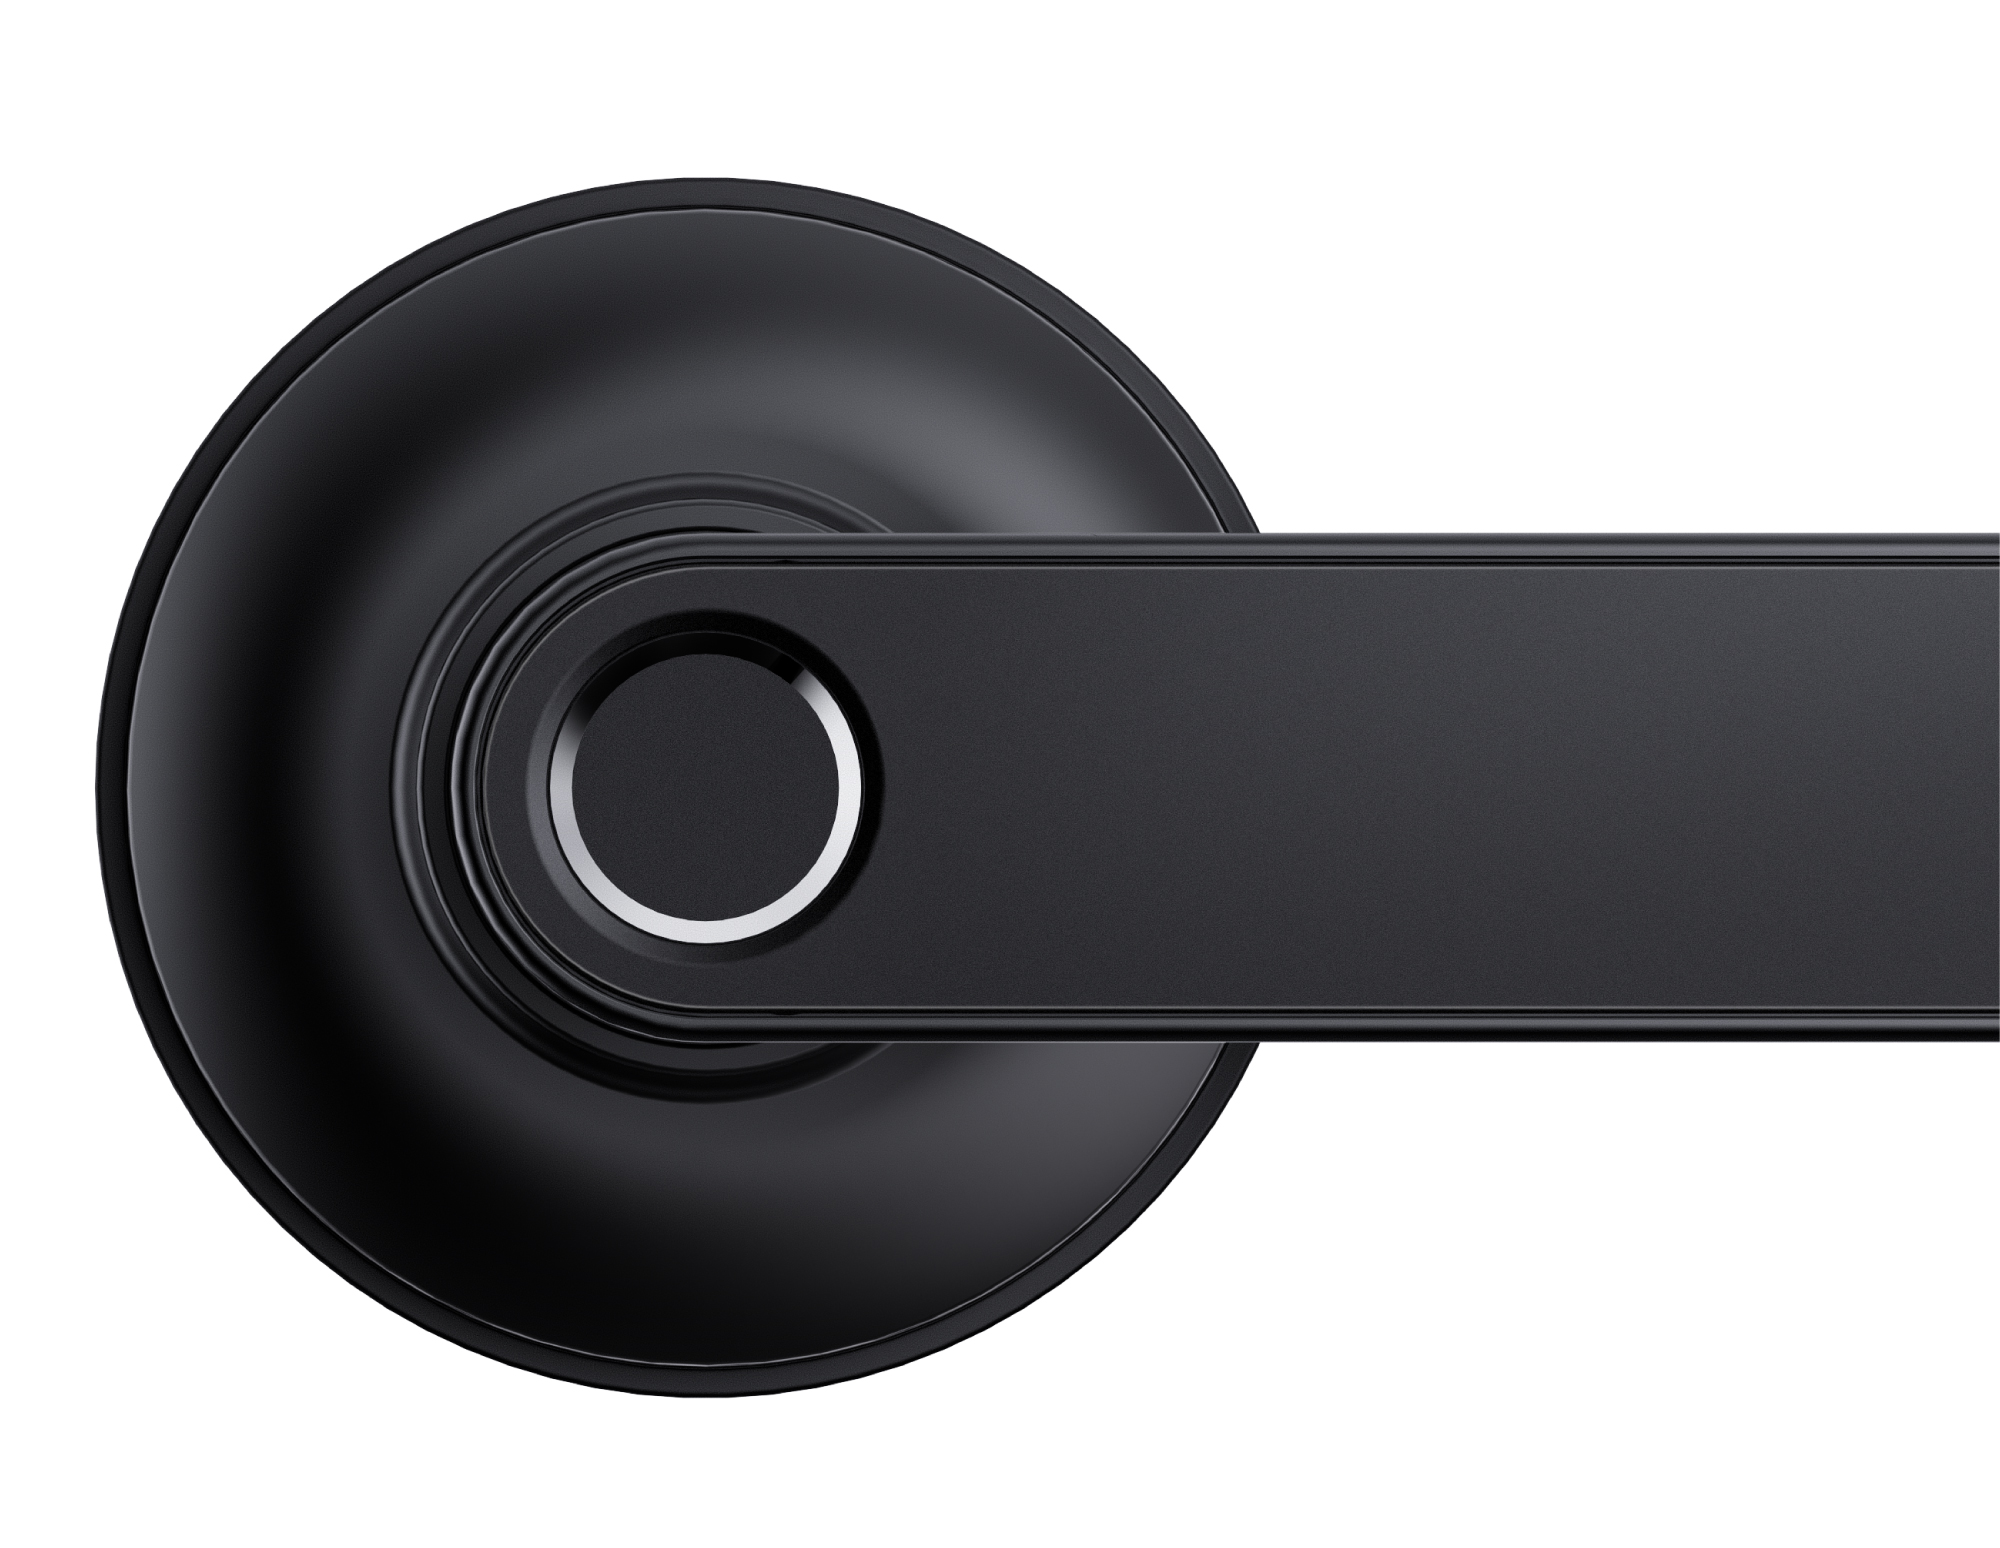 Gainsborough Liberty Smart Touch Lever Lock Features